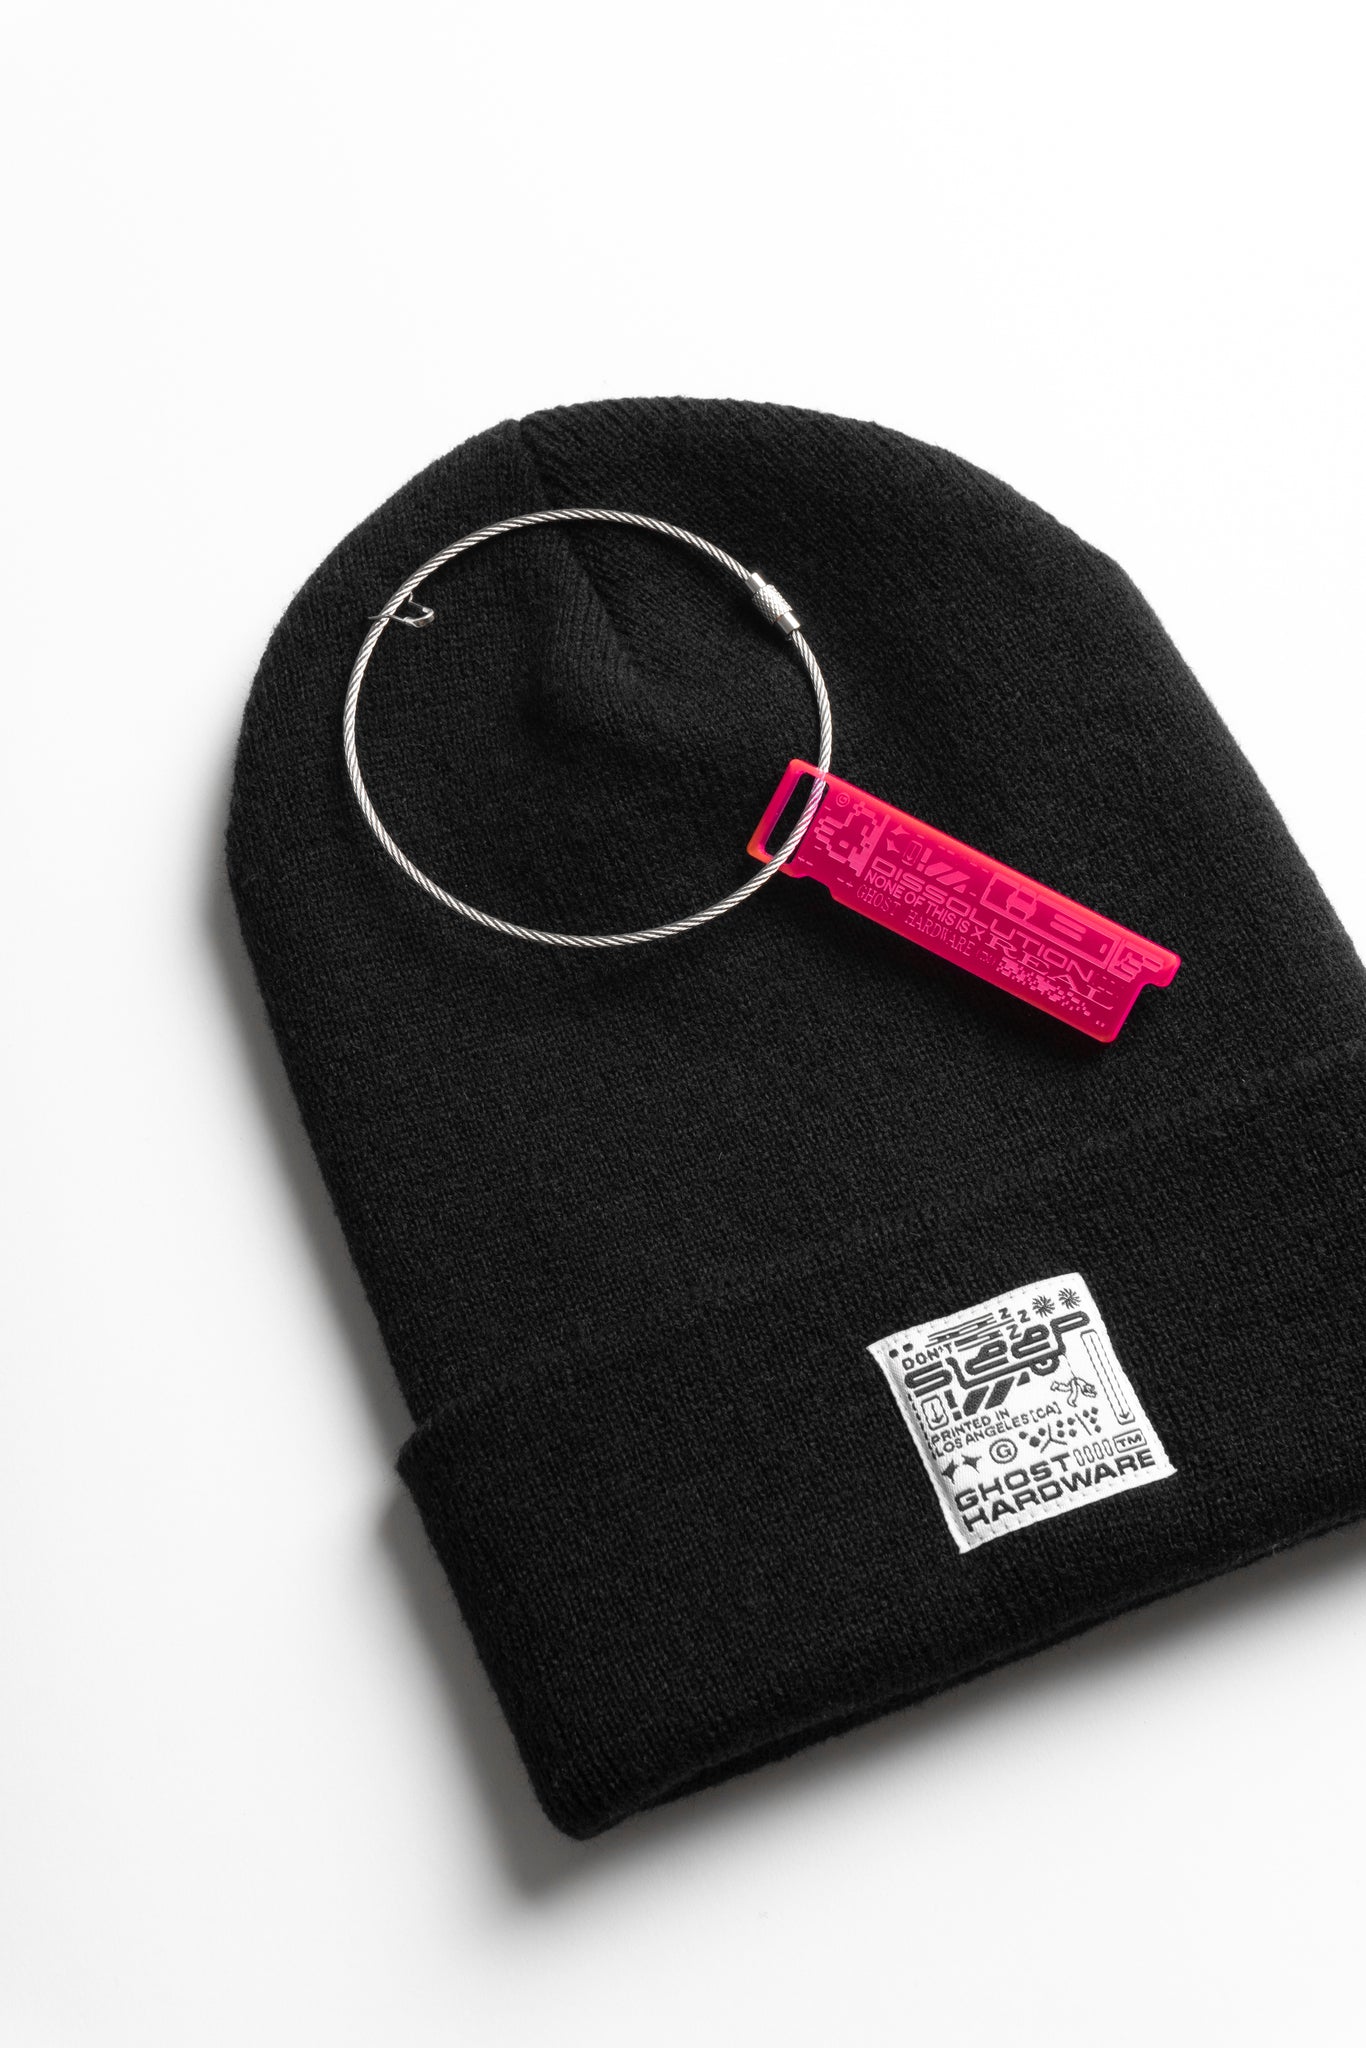 Ghost Hardware [ patch ] Beanie